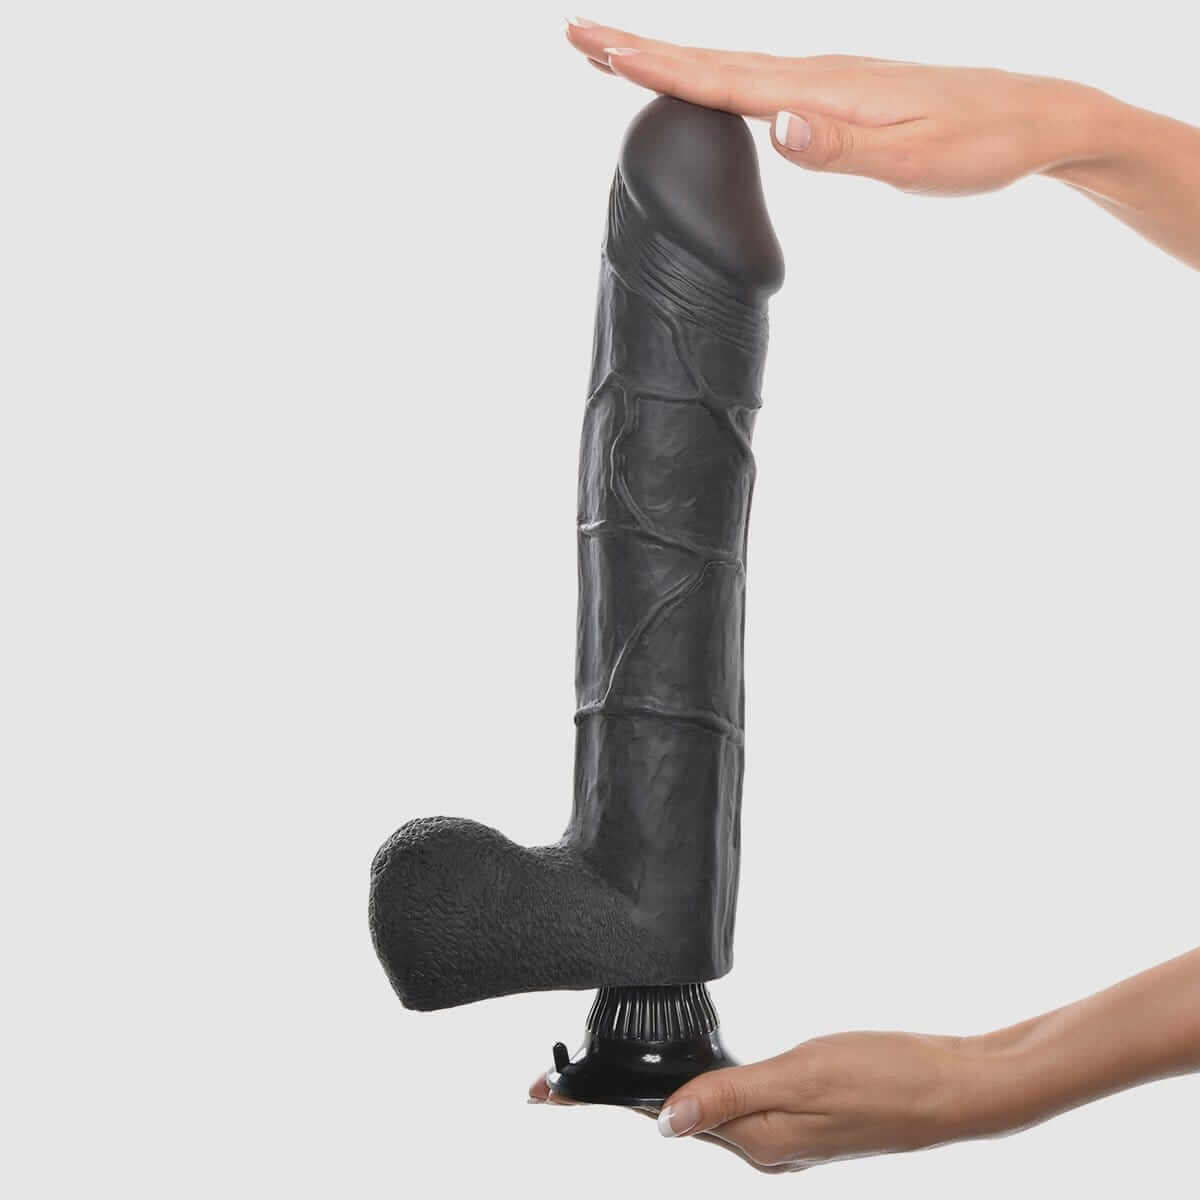 Real Feel Deluxe No.12 - 12" Black Dildo - Thorn & Feather Sex Toy Canada